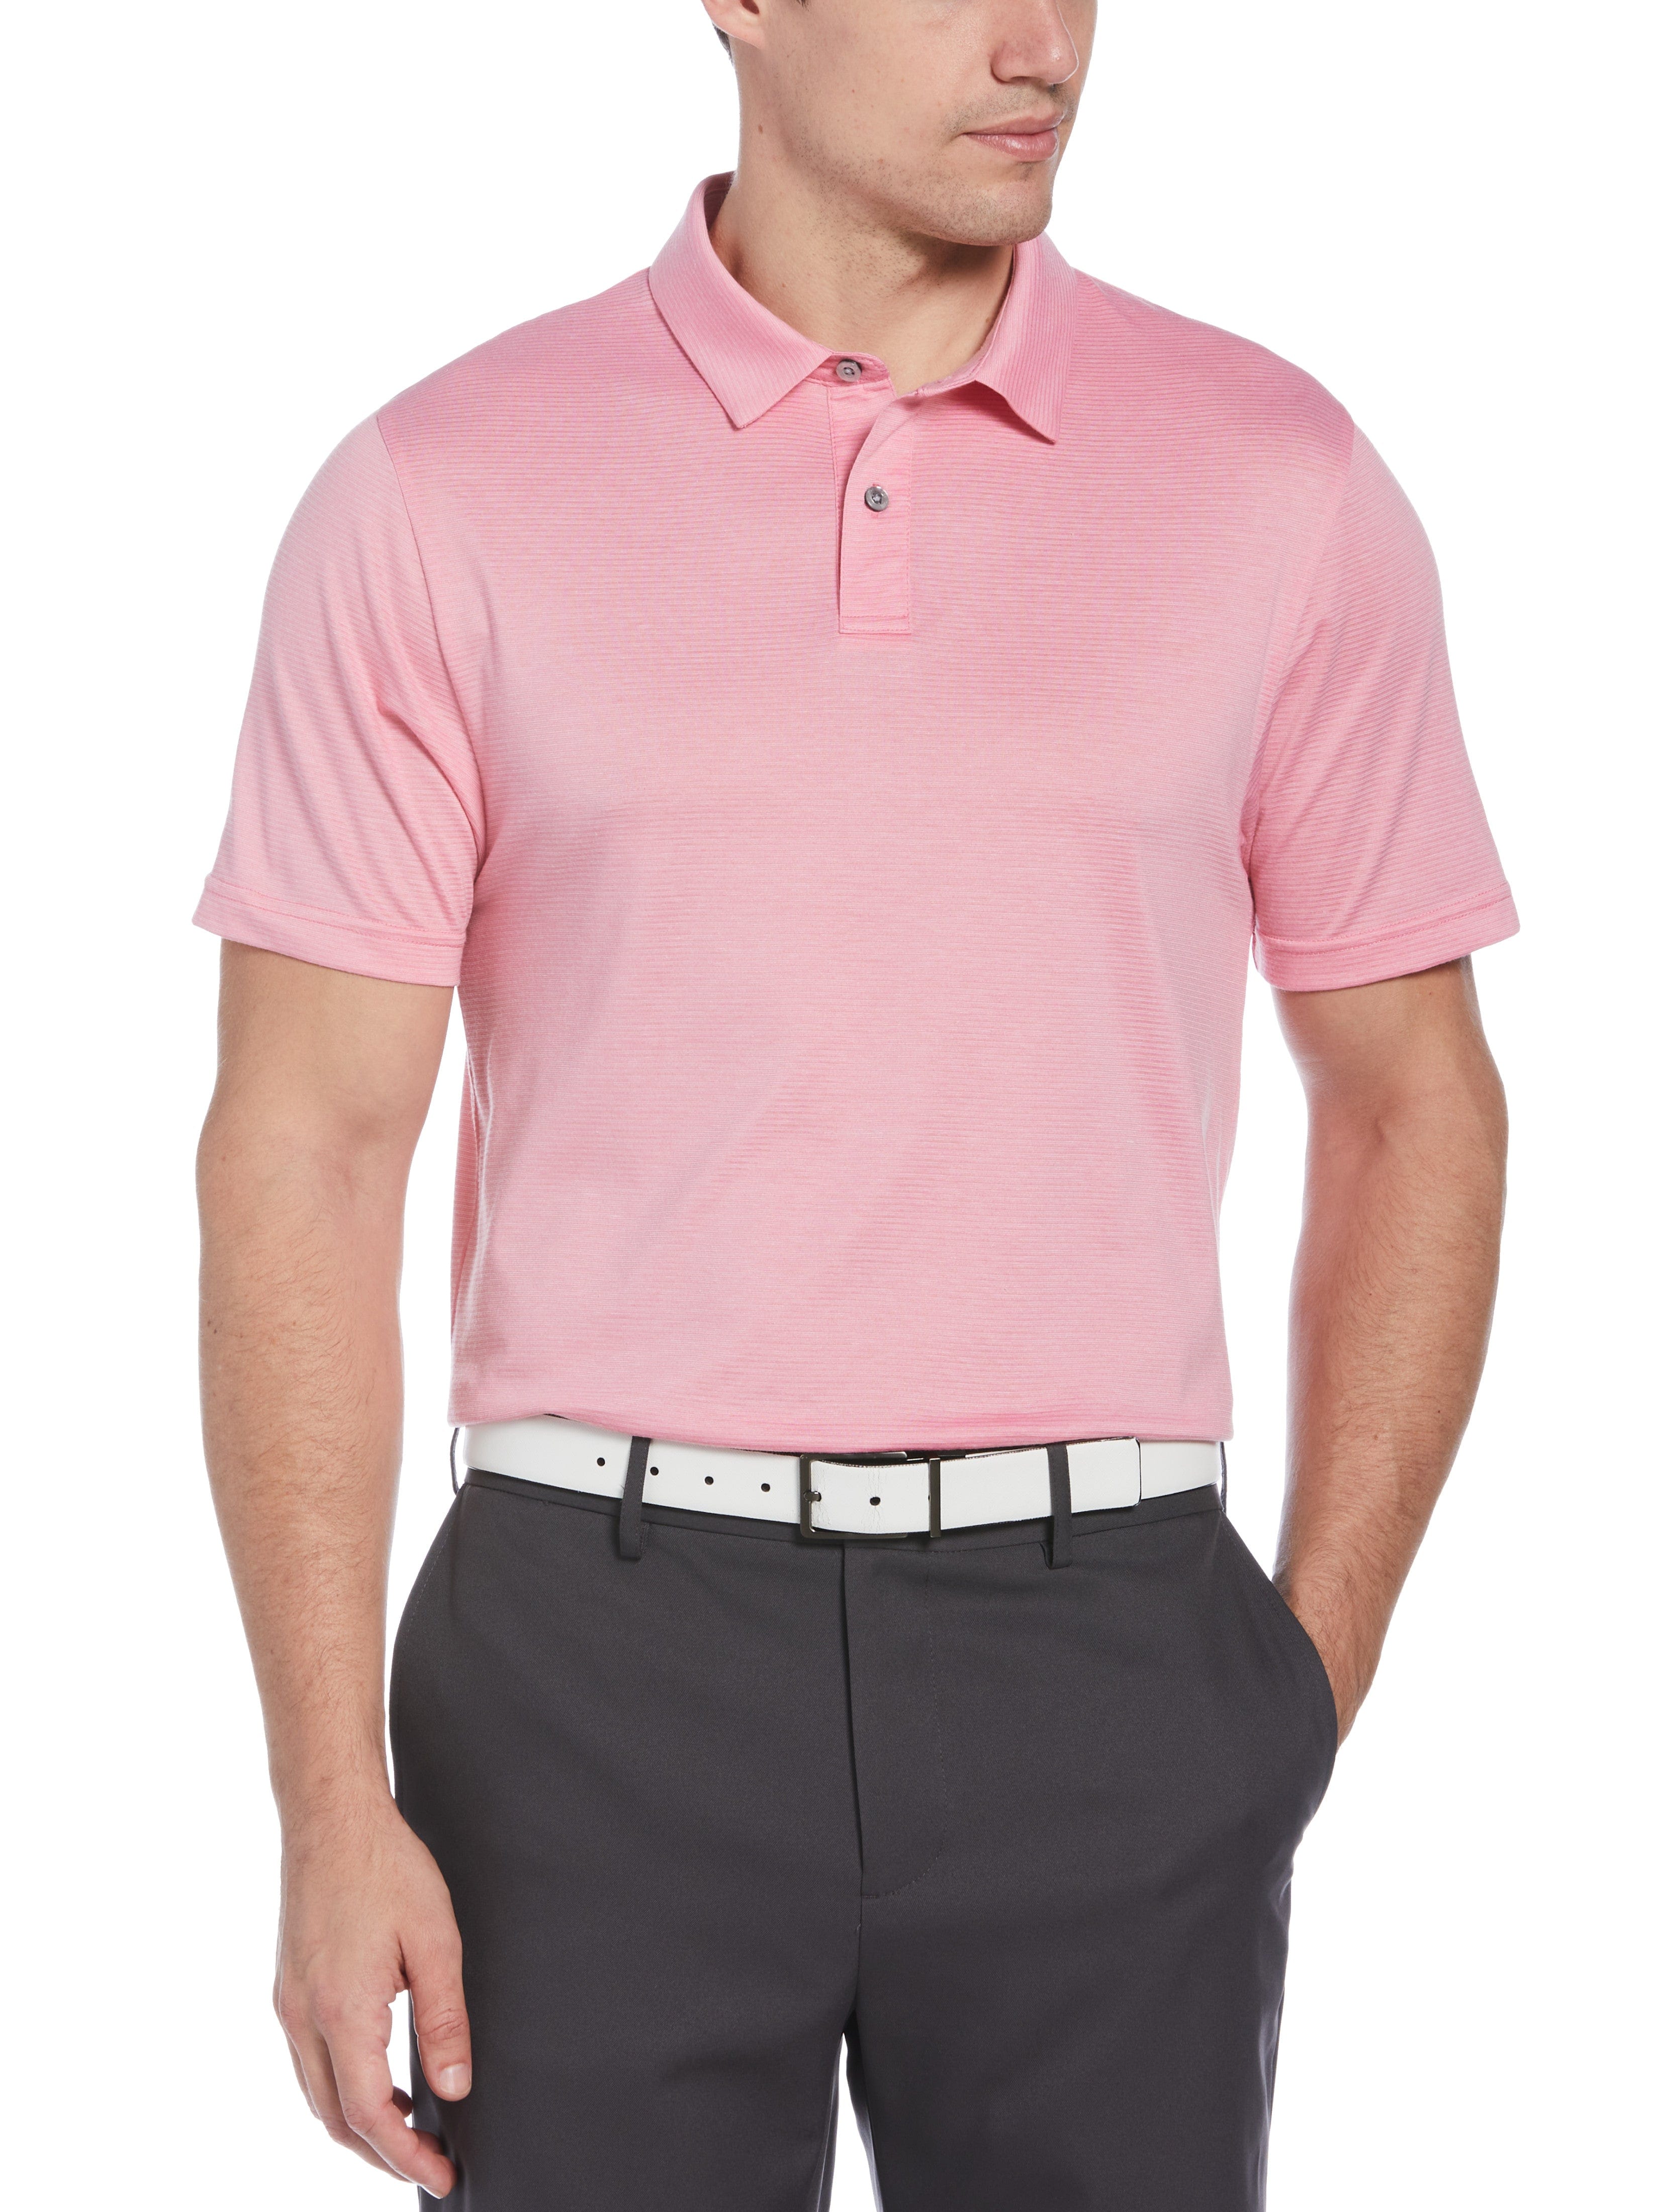 PGA TOUR Apparel Mens Eco Golf Polo Shirt, Size Large, Sea Pink Heather, Polyester/Recycled Polyester/Cotton | Golf Apparel Shop